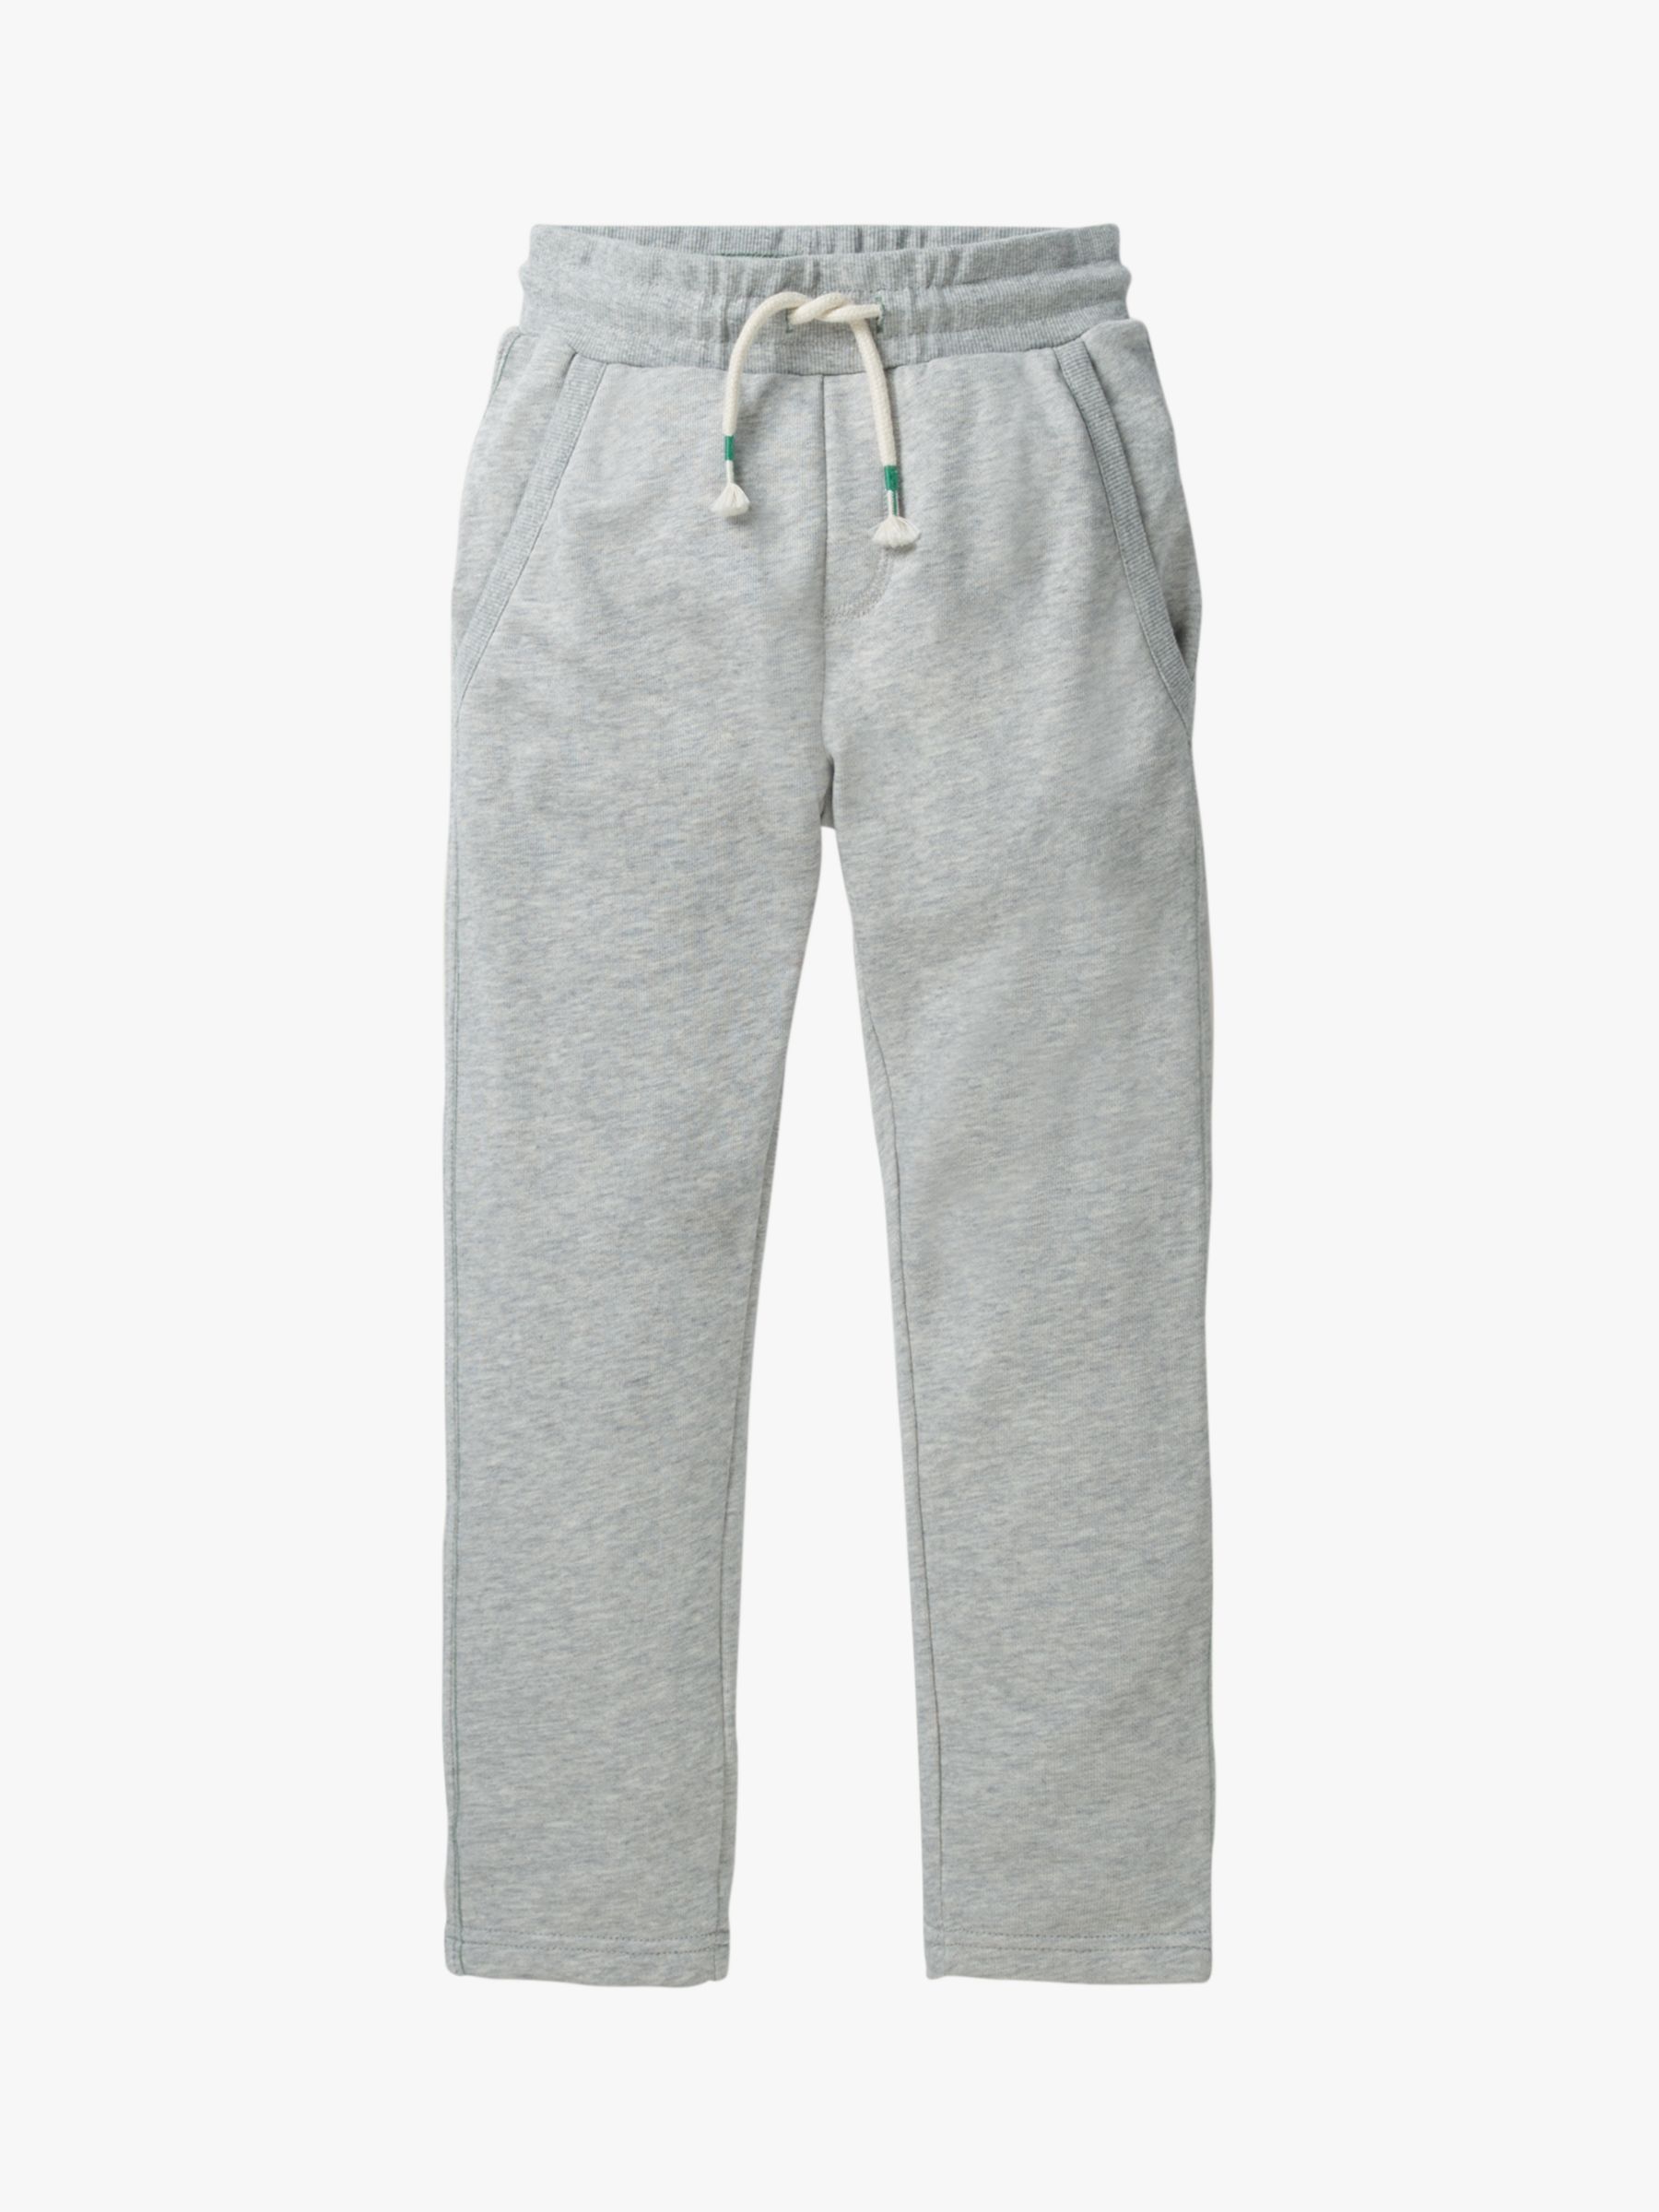 Image of Mini Boden Boys Essential Joggers Grey